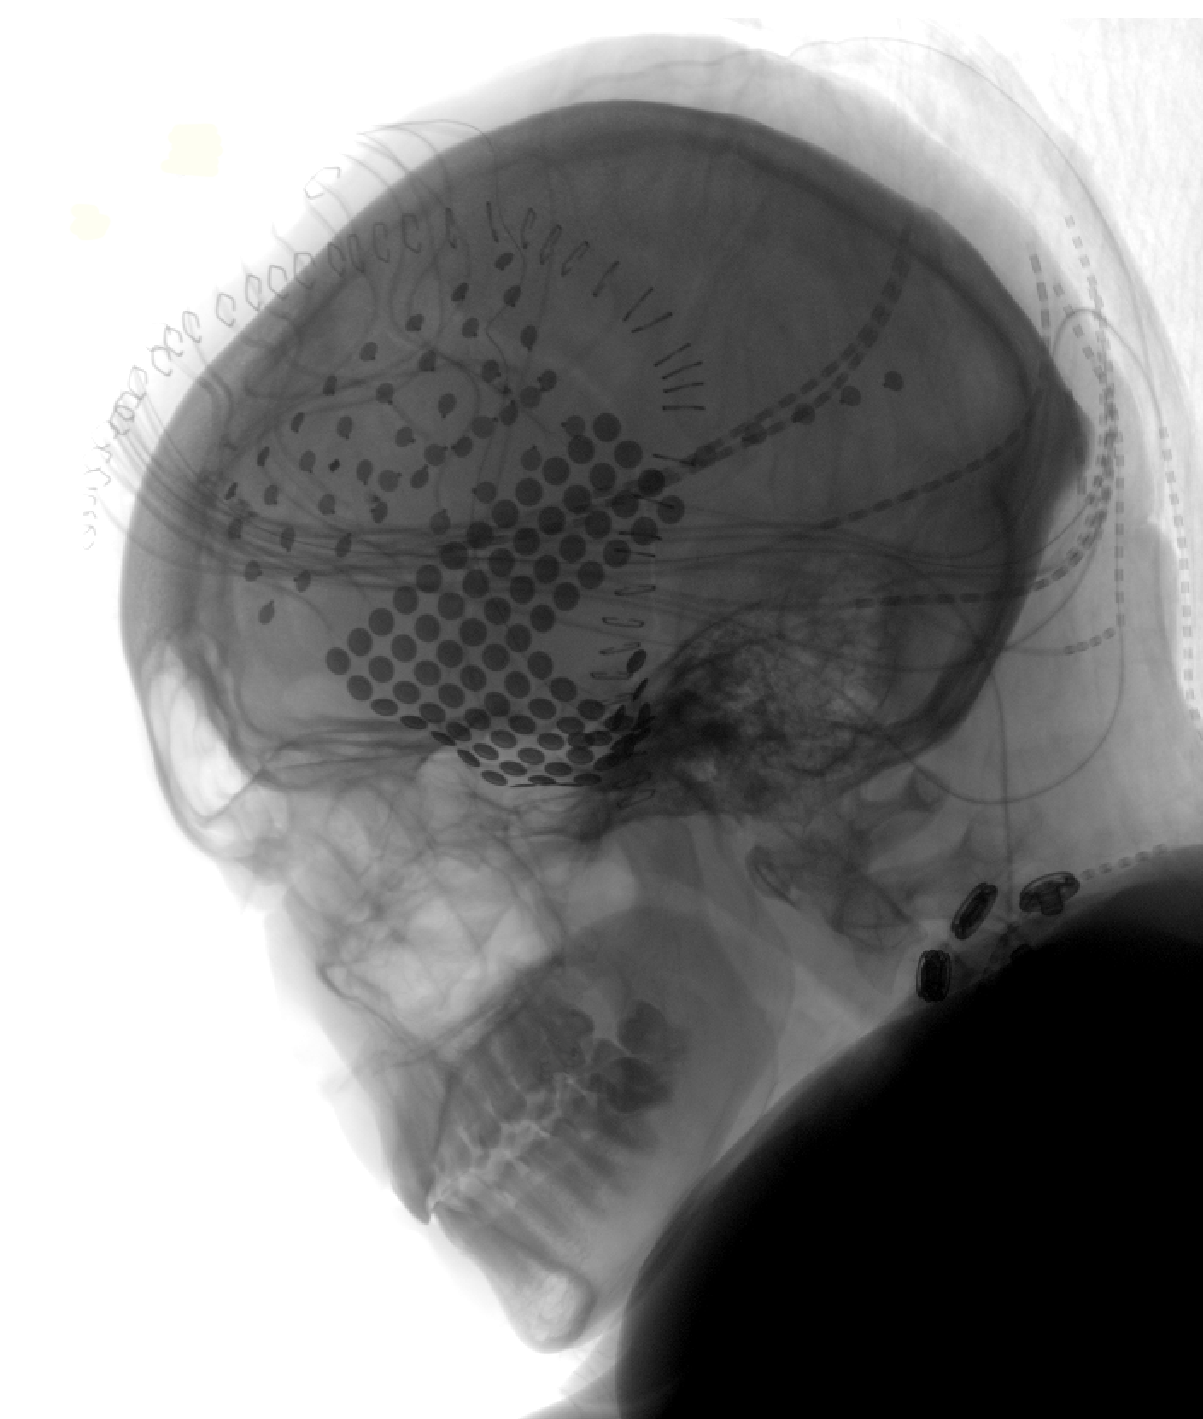 B&W X-ray of skull, showing electrodes on brain